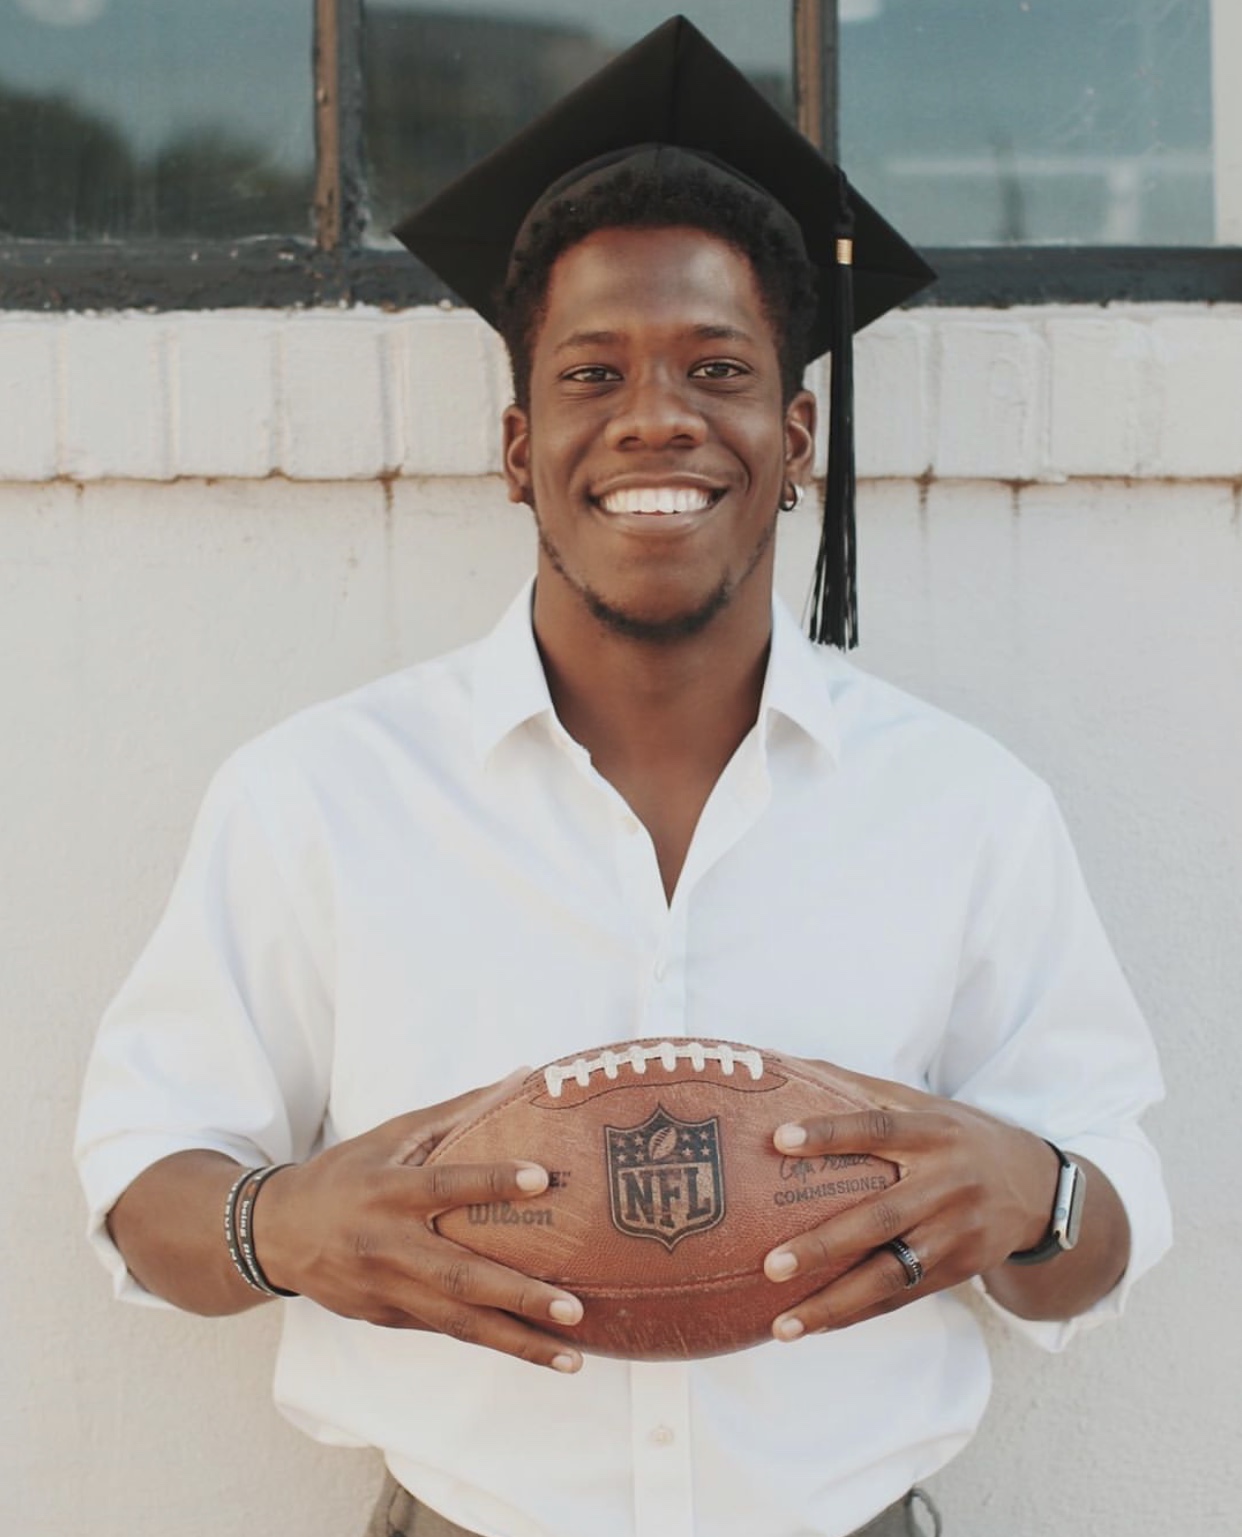 Male student in graduation cap holds football.